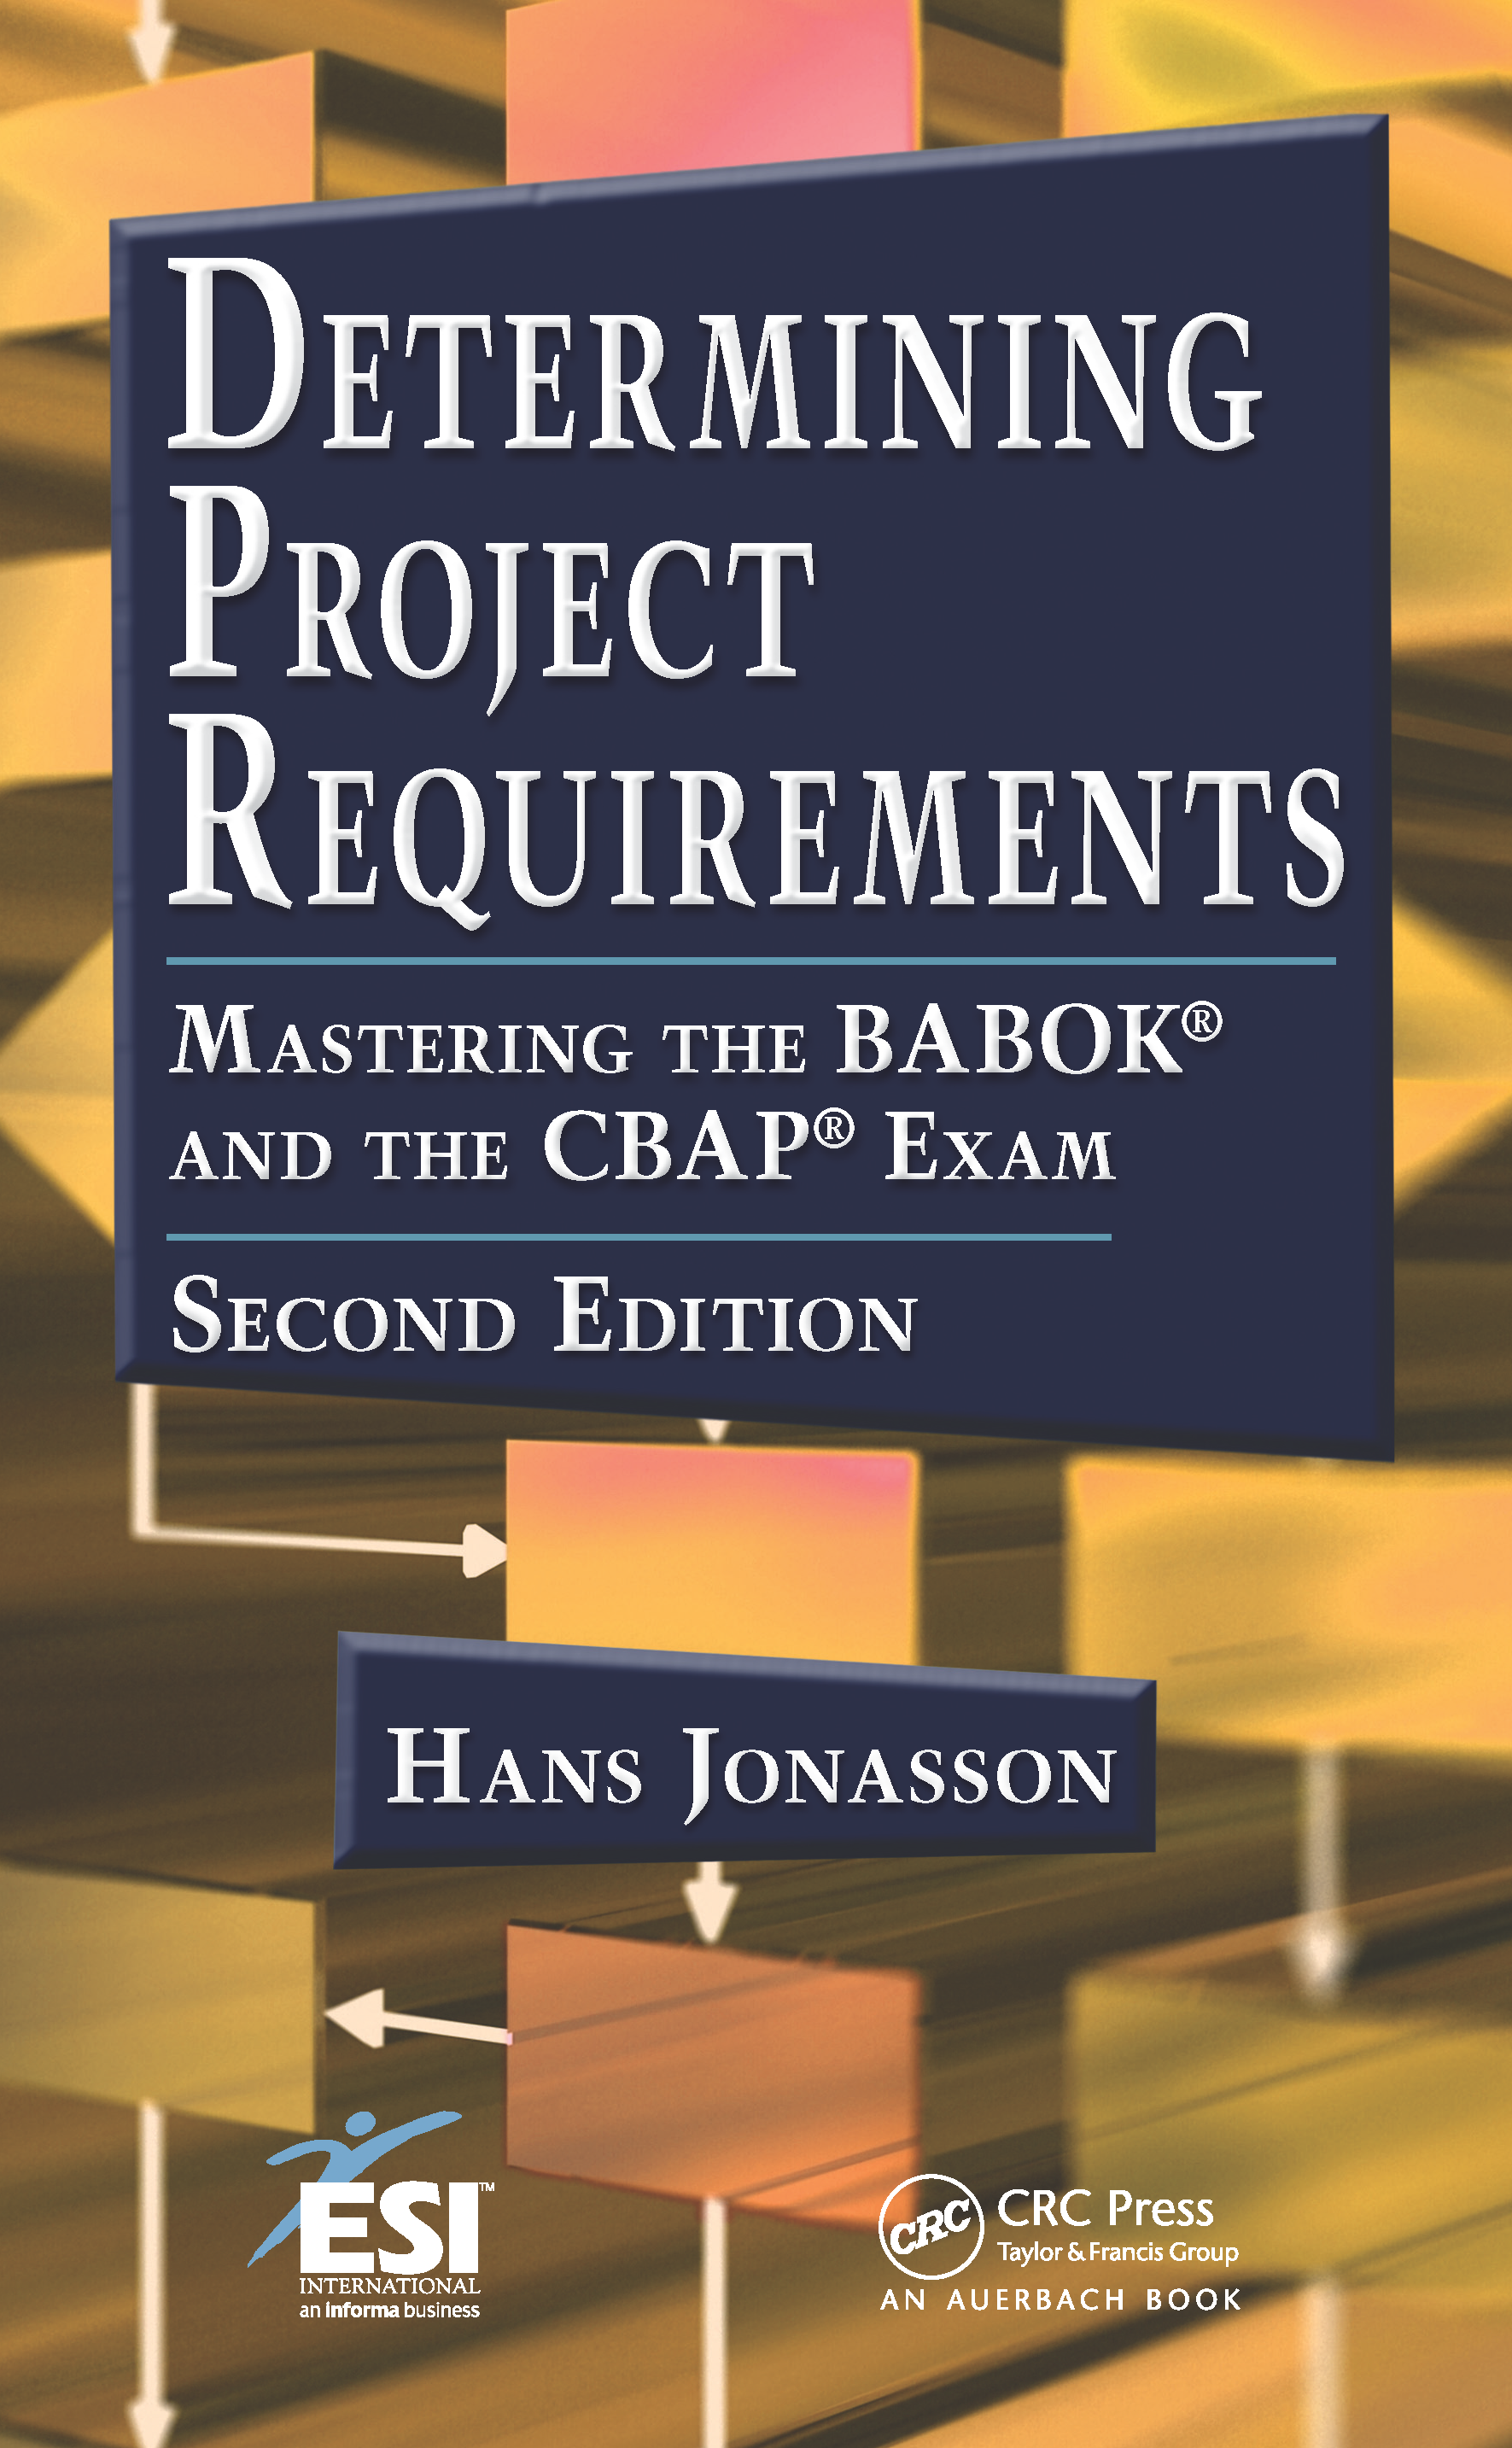 Cover for Determining Project Requirements, Second Edition: Mastering the BABOK® and the CBAP® Exam.png